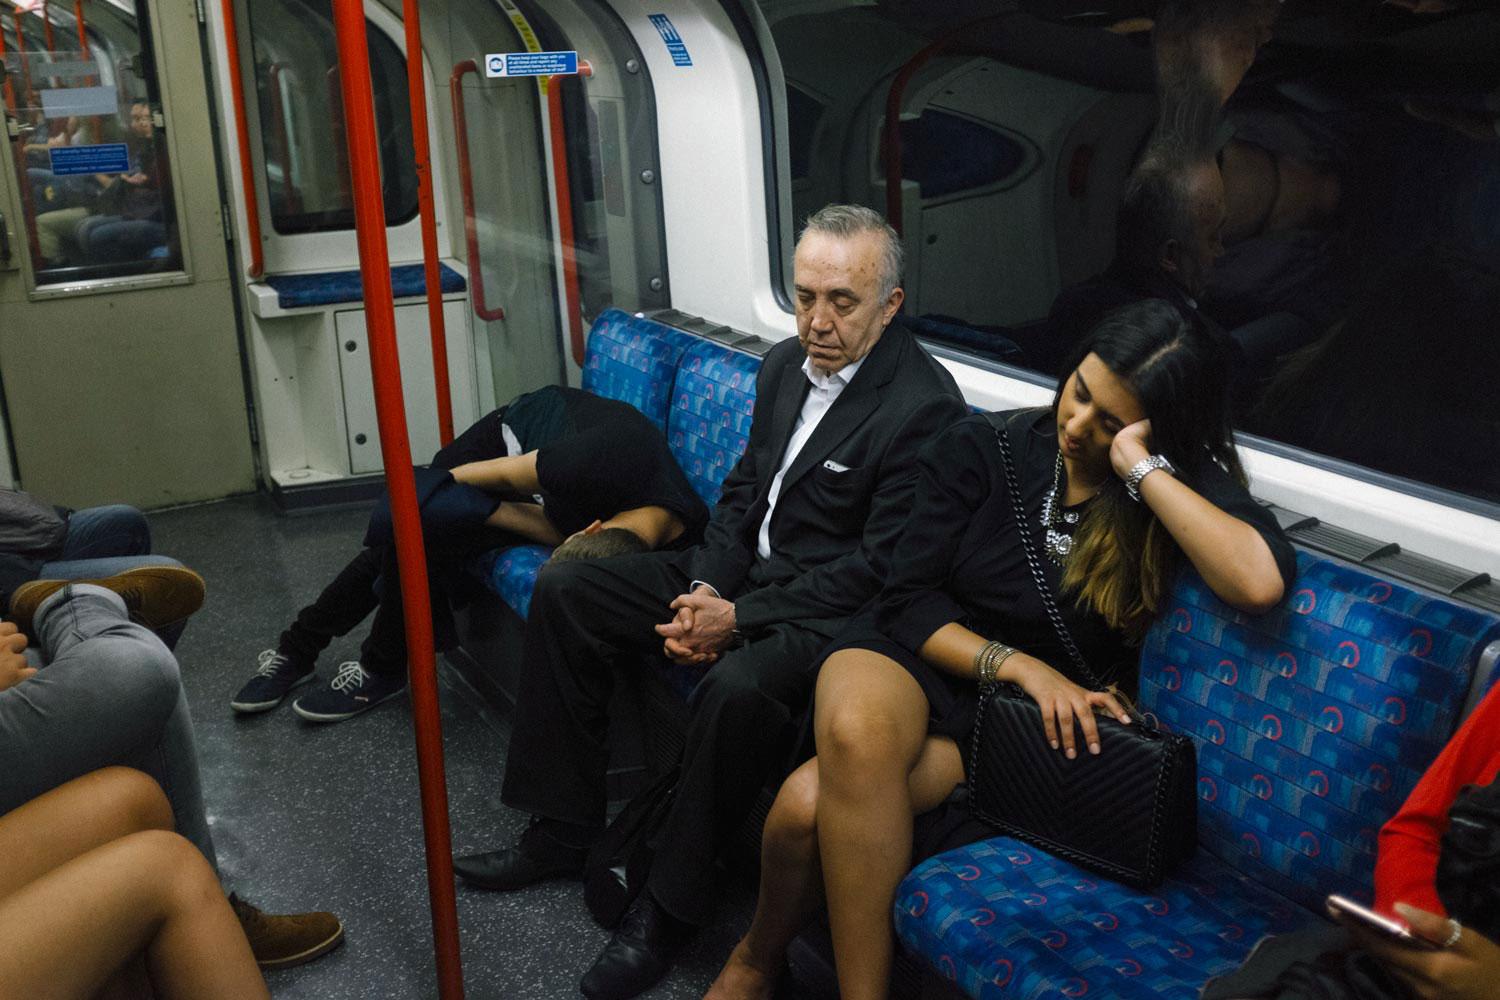 By 2 a.m. the central line trains were a hot place to be. Subsequently it meant that people were lulled into taking a nap on their way home. Surprisingly the tube didn't just cater for the party goers, it was also used by city folk on their way back from